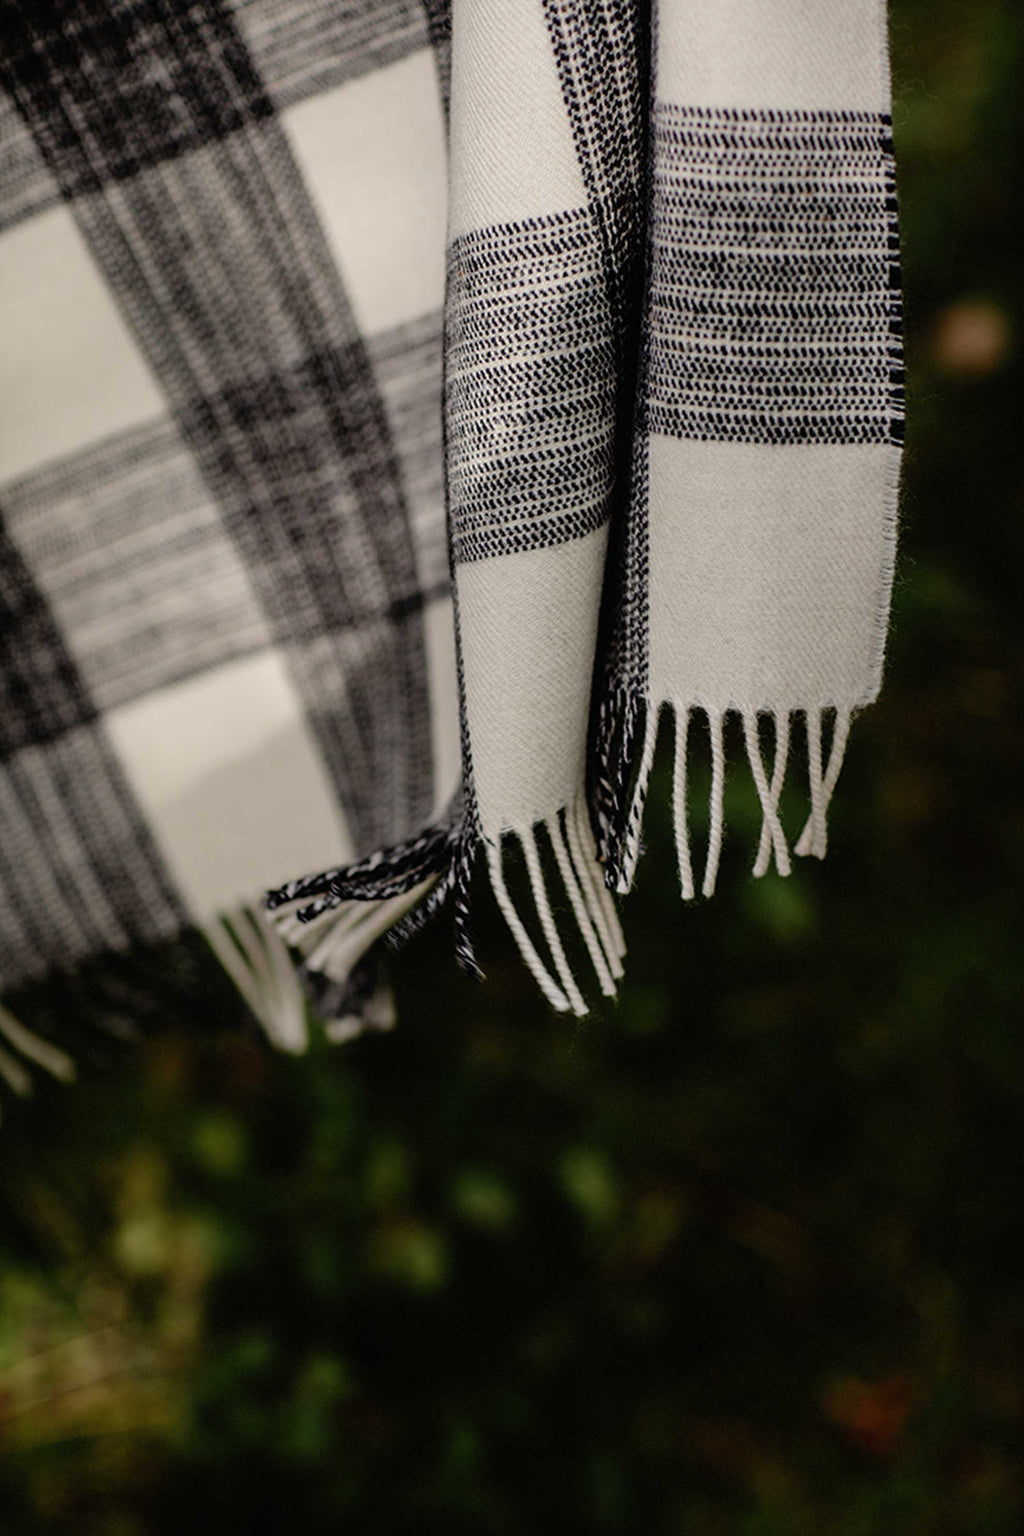 Large Donegal 'Imperfect Check' Blanket